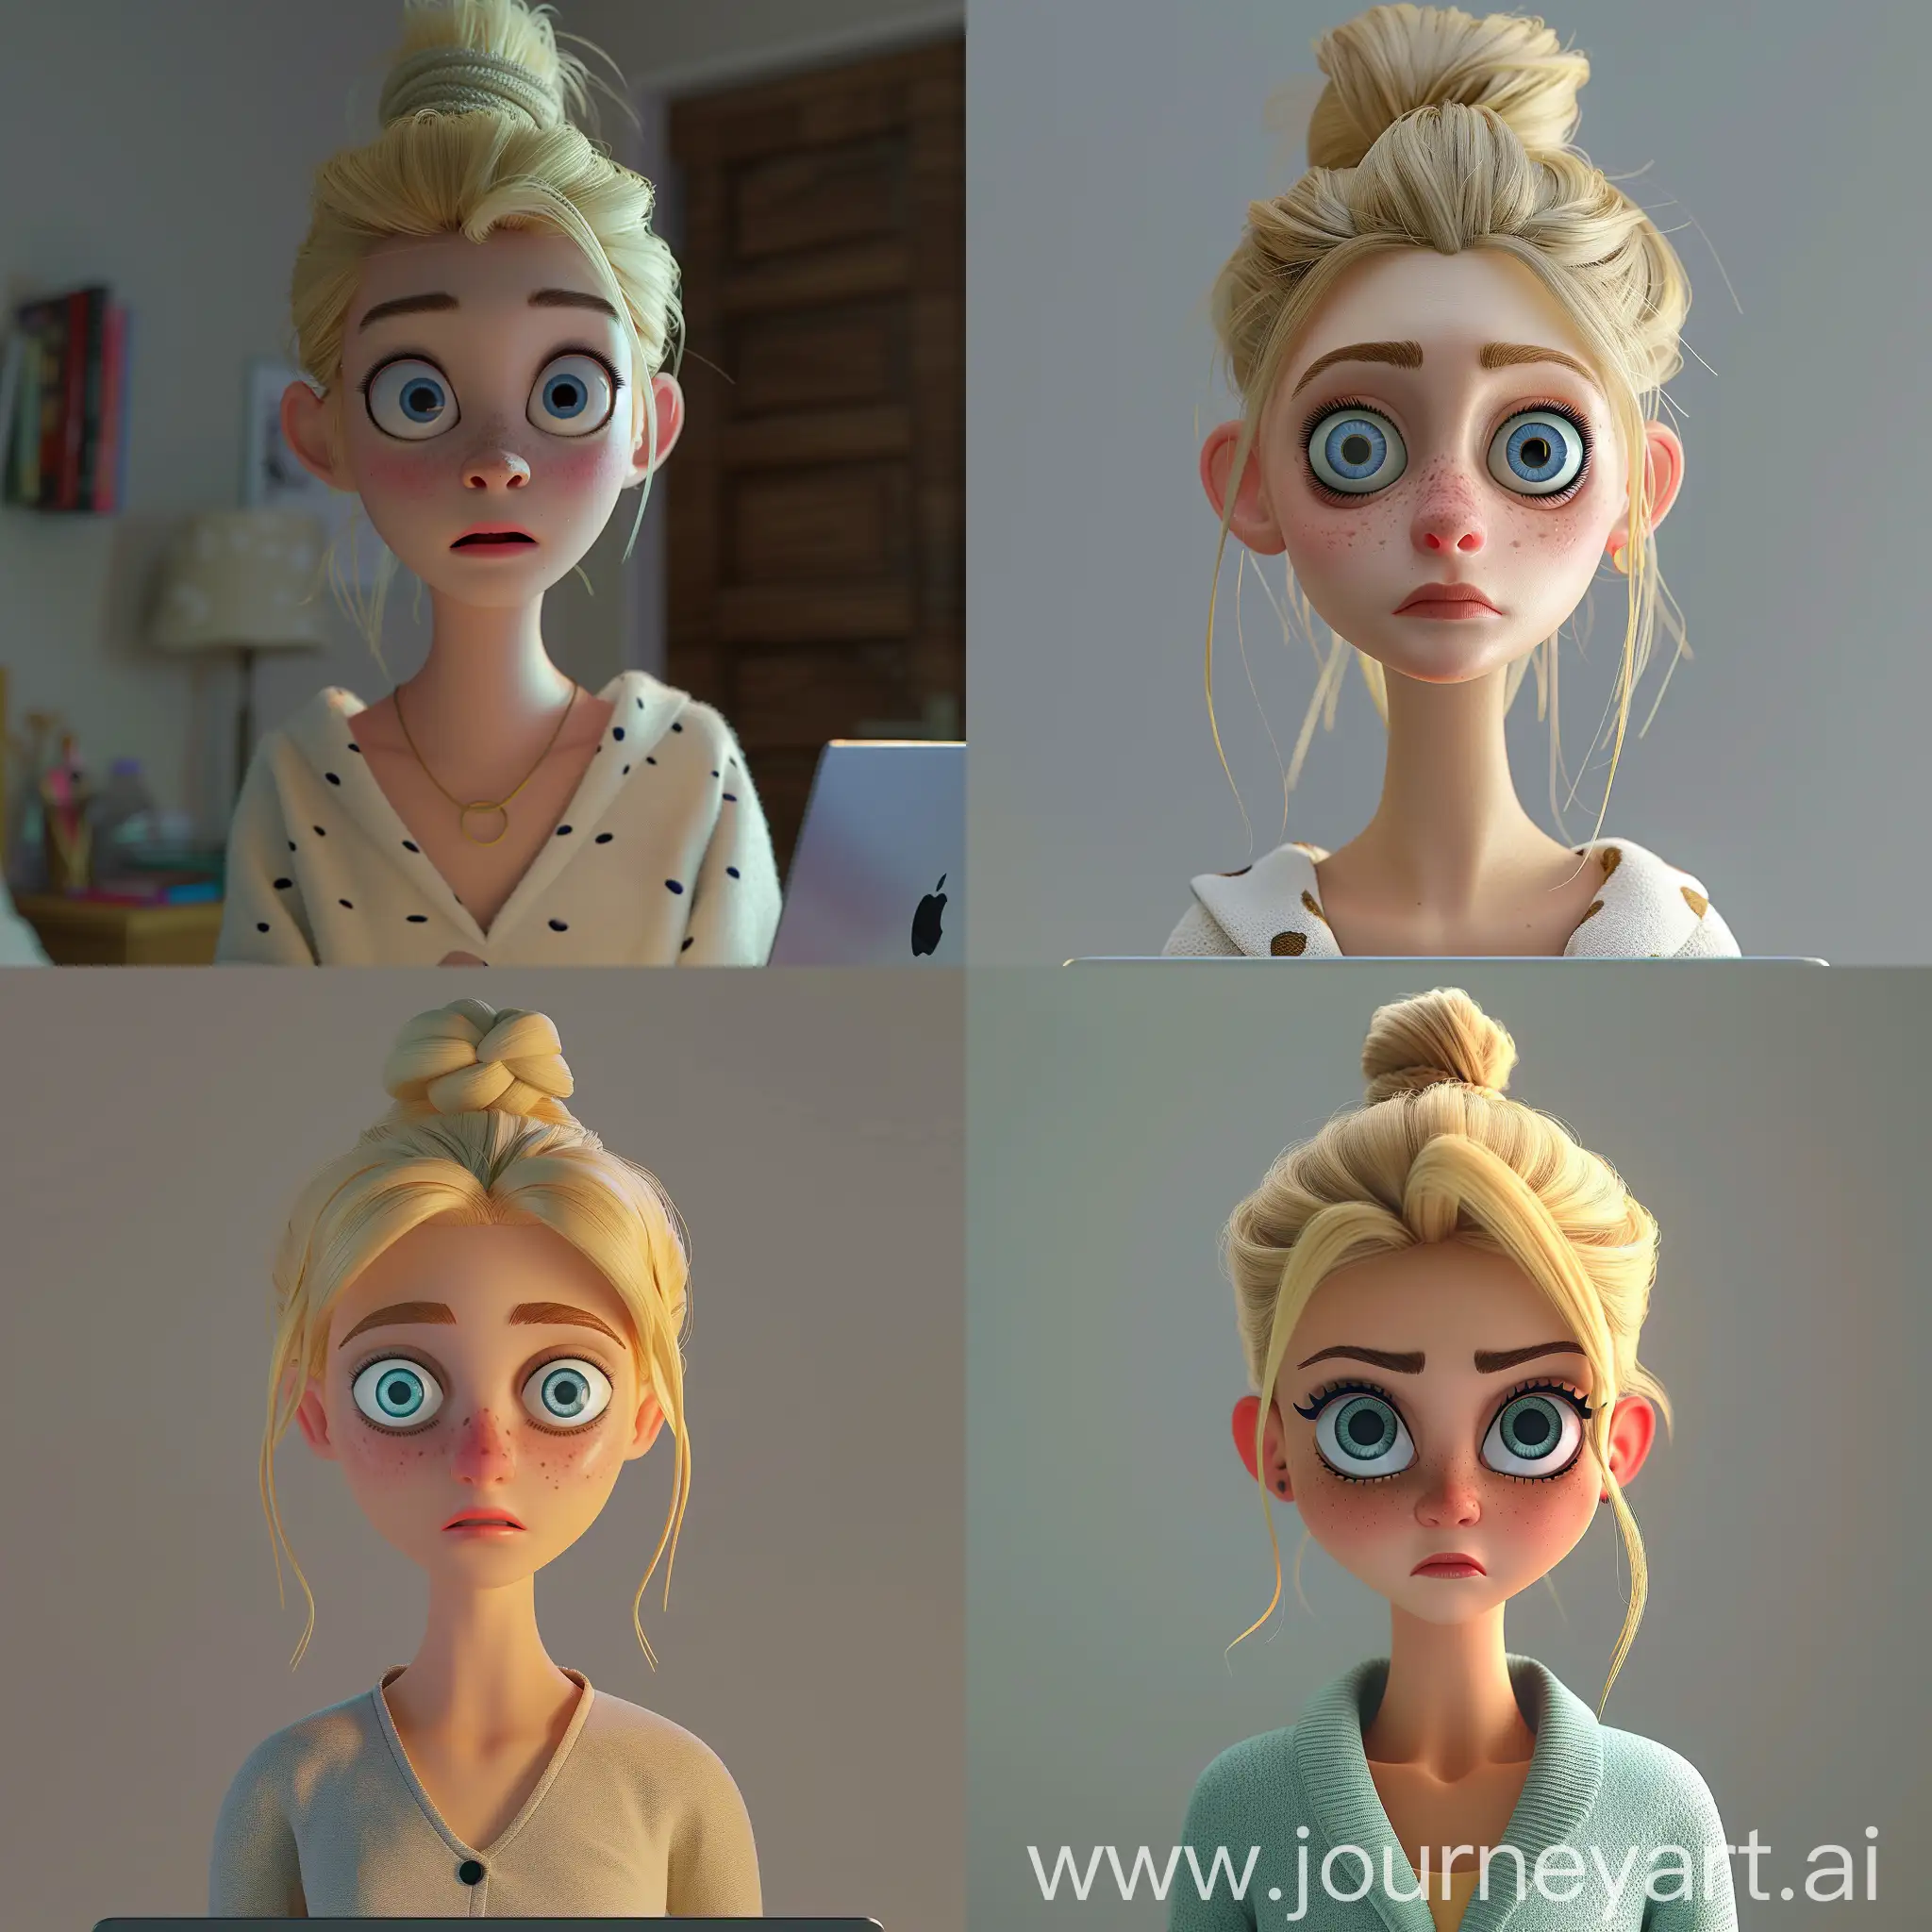 32-years-old woman after a sleepless night trying to work in front of the laptop. Blond with blue eyes. hair tied up in a bun and wearing loungewear, with circles under the eyes. 3D pixar character